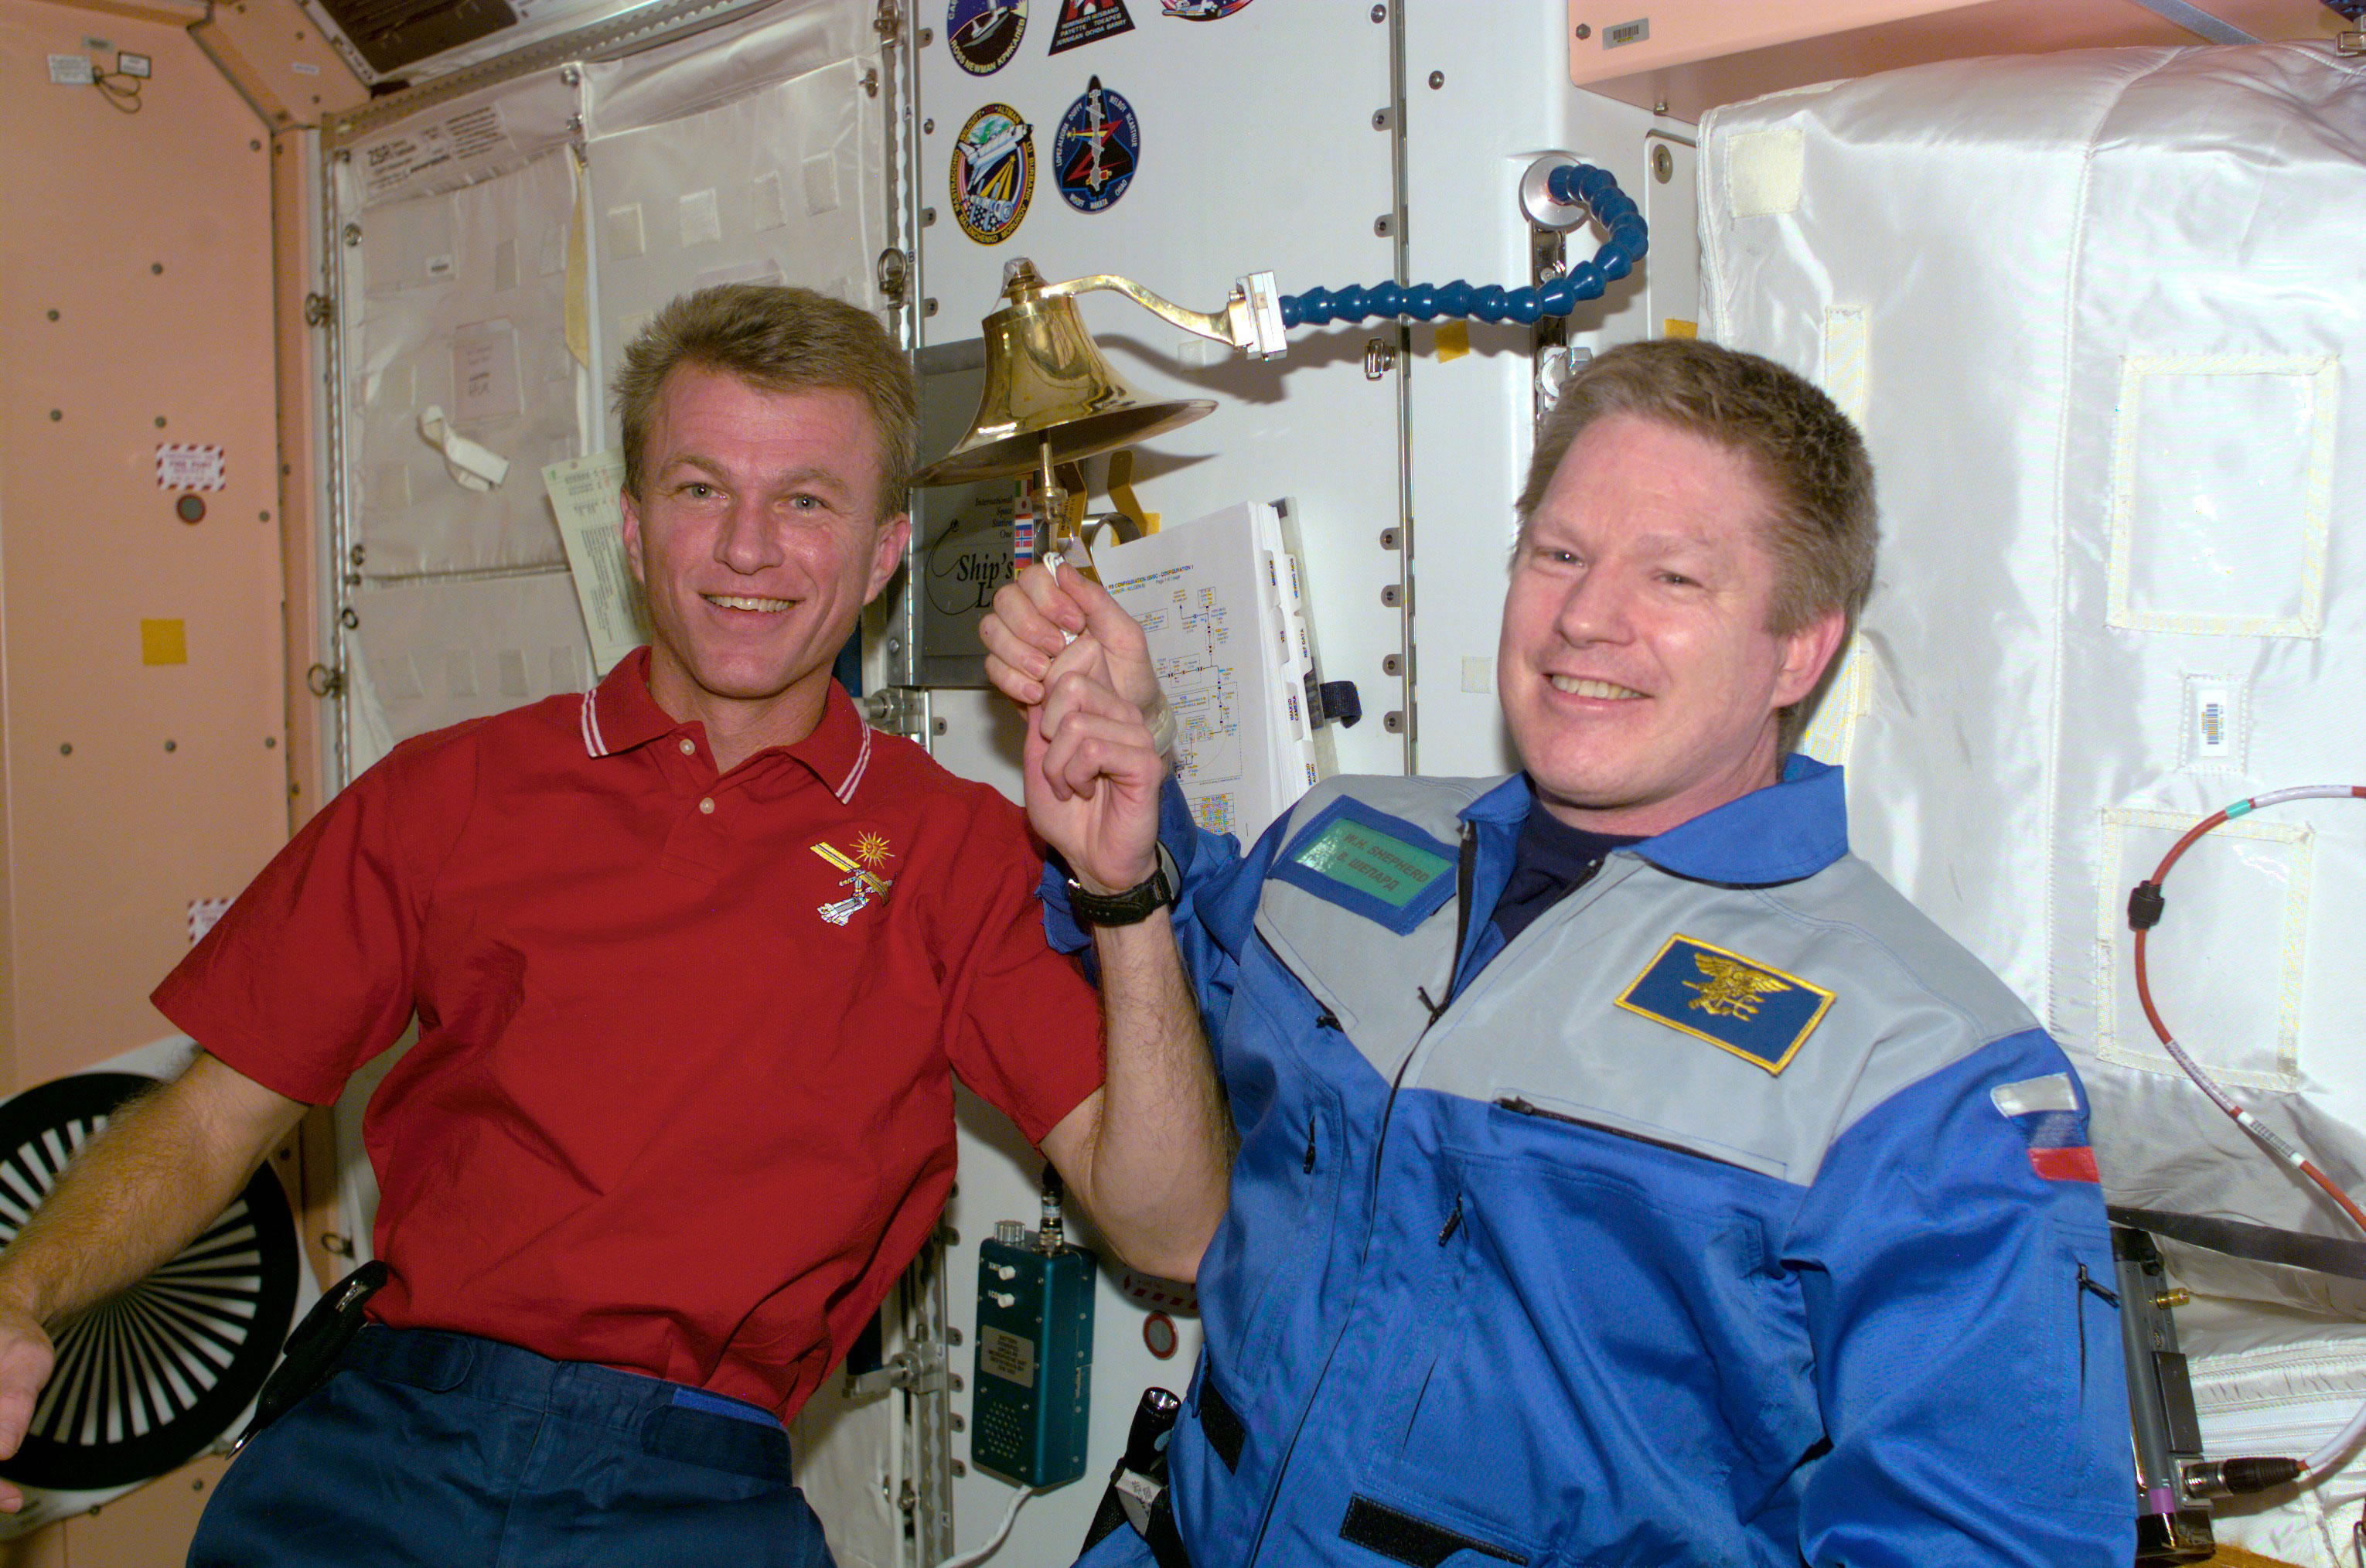 Astronauts Brent W. Jett, Jr. (left) and William M. Shepherd participate in an old Navy tradition of ringing a bell to announce the arrival or departure of someone to a ship.The bell is mounted on the wall in the Unity node of the International Space Station (ISS). Credit: NASA